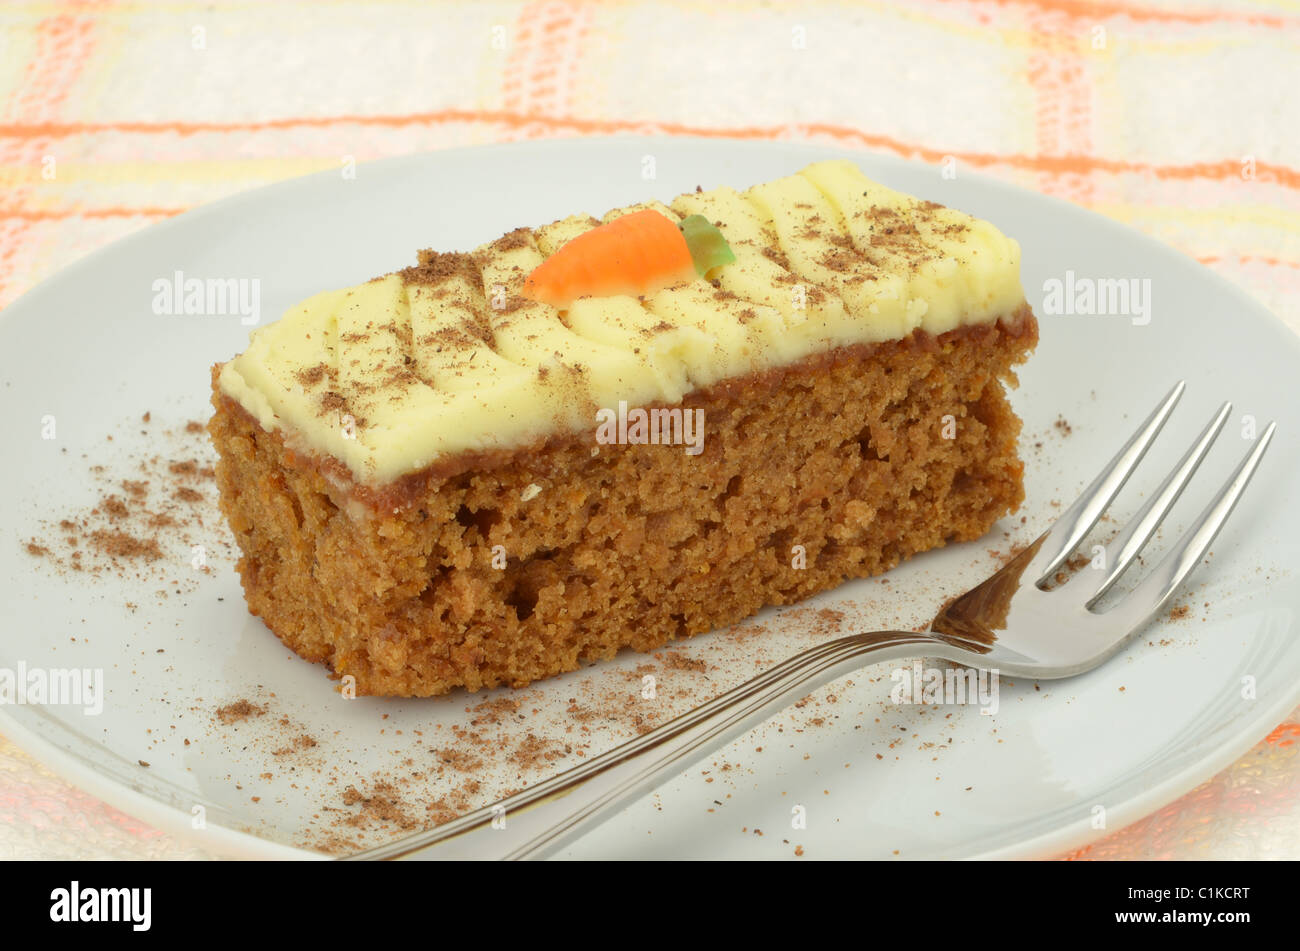 Slice of carrot cake on a white plate Stock Photo